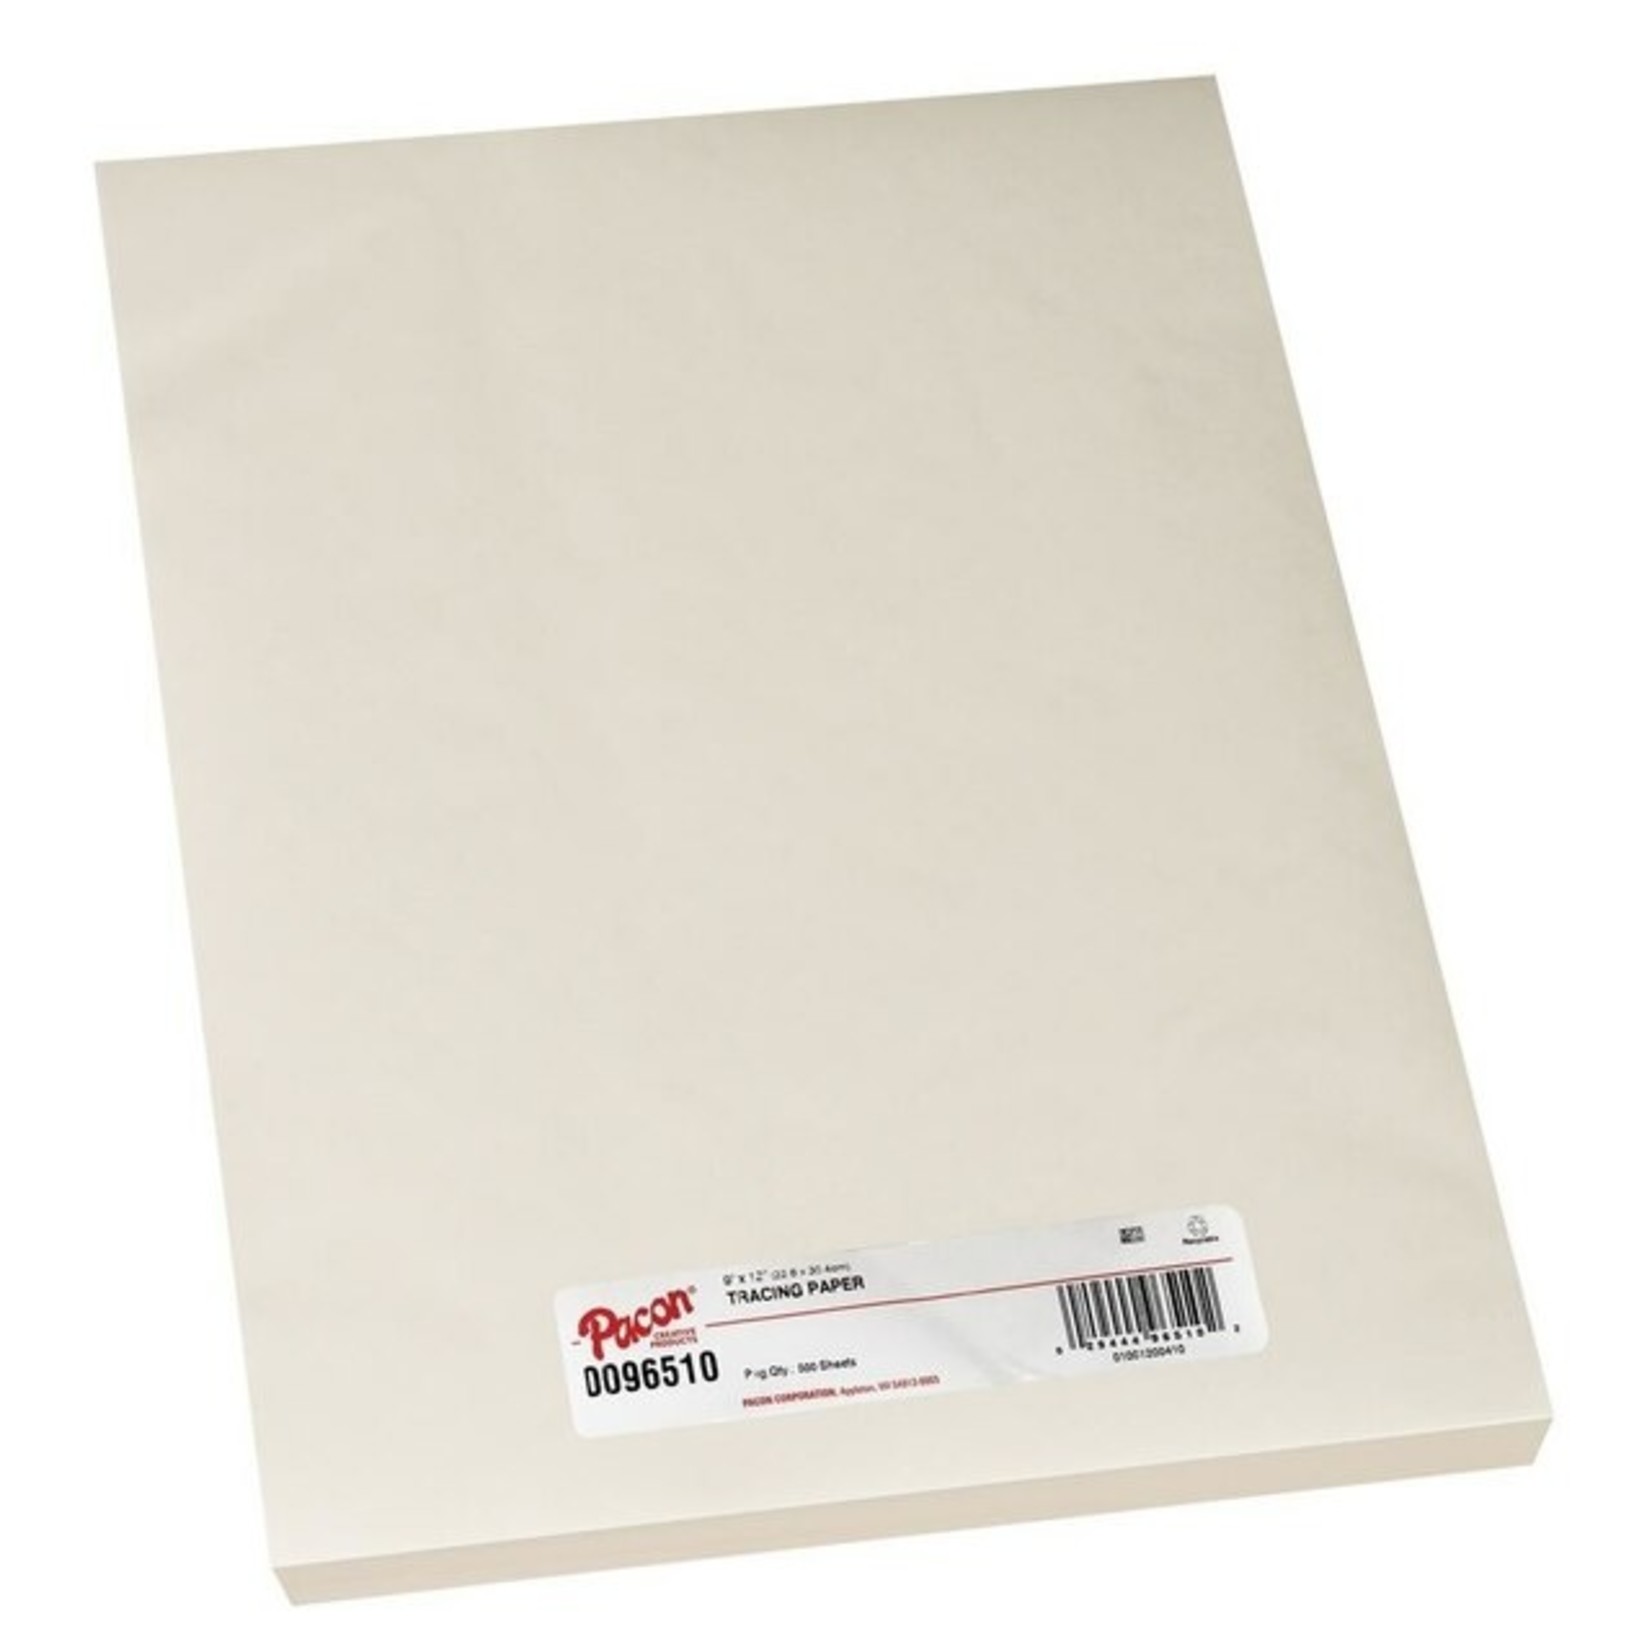 ELECTRUM PACON TRACING PAPER - 500 SHEETS